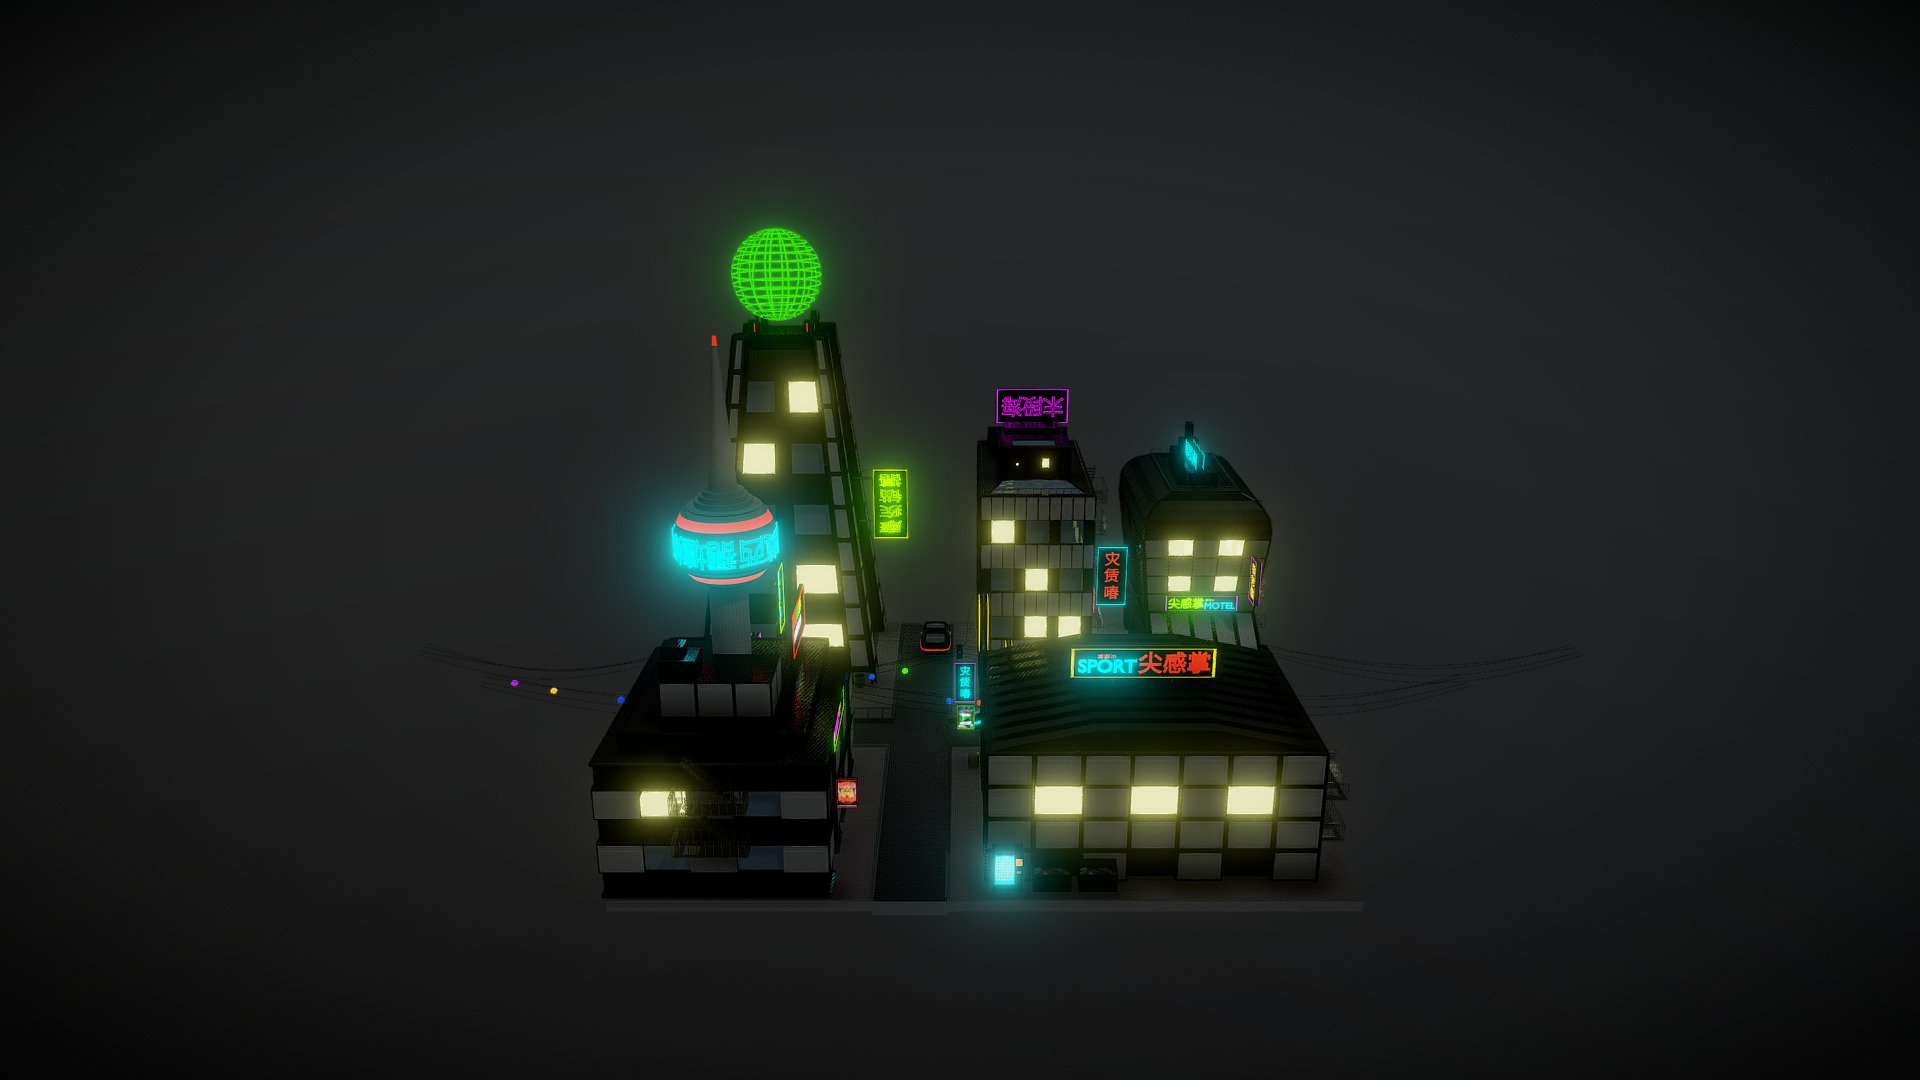 A little Cyberpunk City I made in Blender about a year ago. All Materials are made in Blender. 

Go to 
https://www.artstation.com/tdsgn
for Render Images made with Blender Cycles 3d model